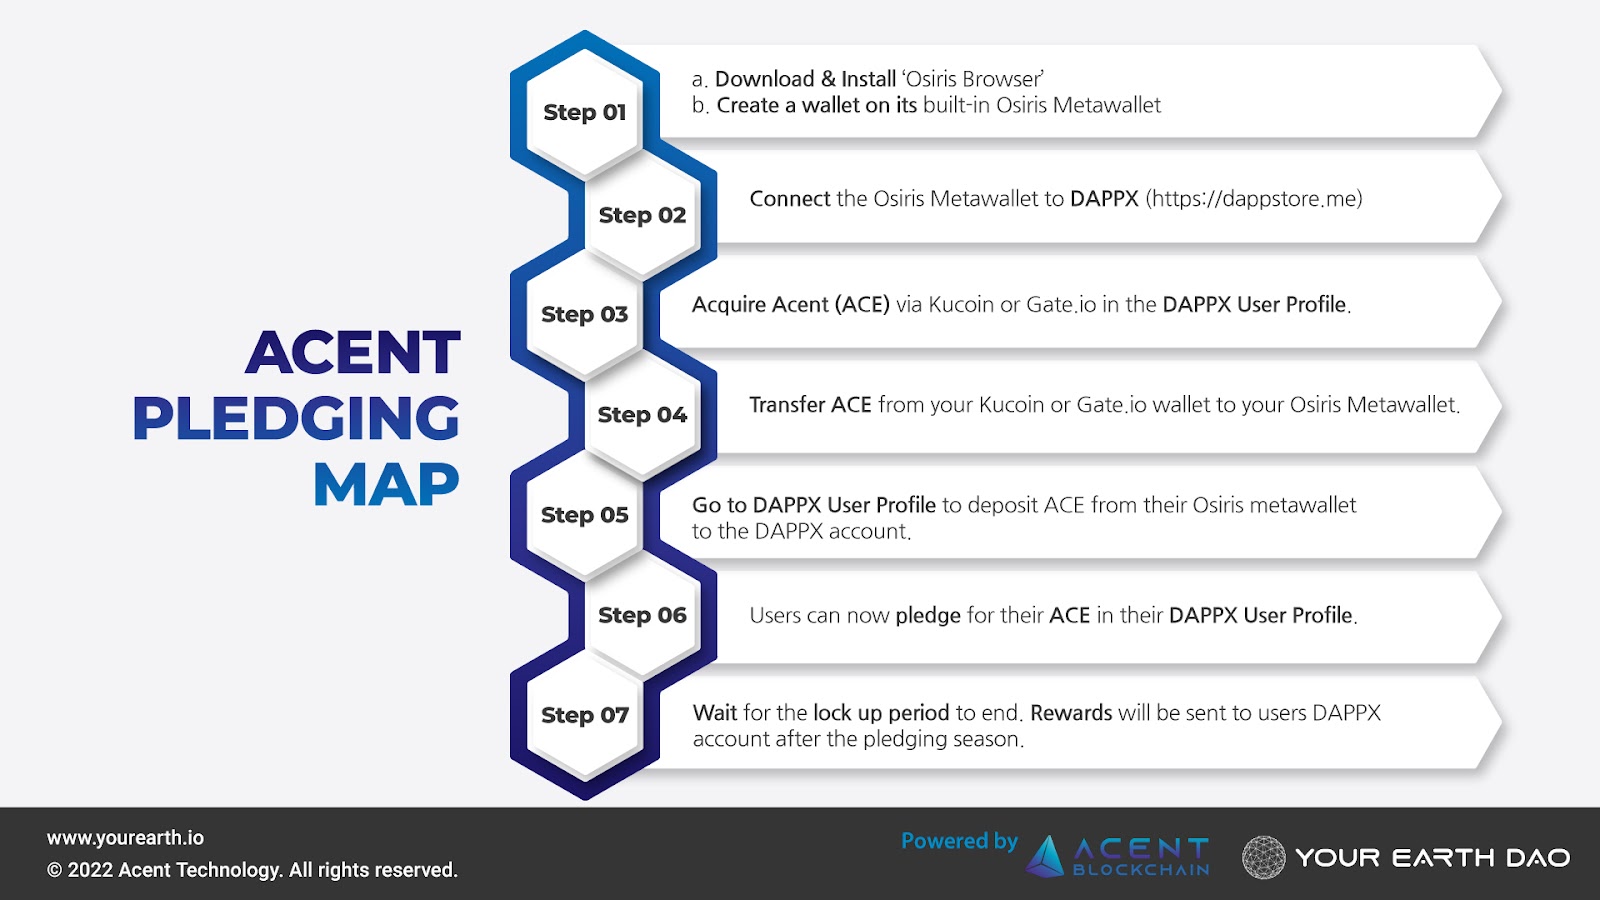 Summary of the steps to pledge your Acent 